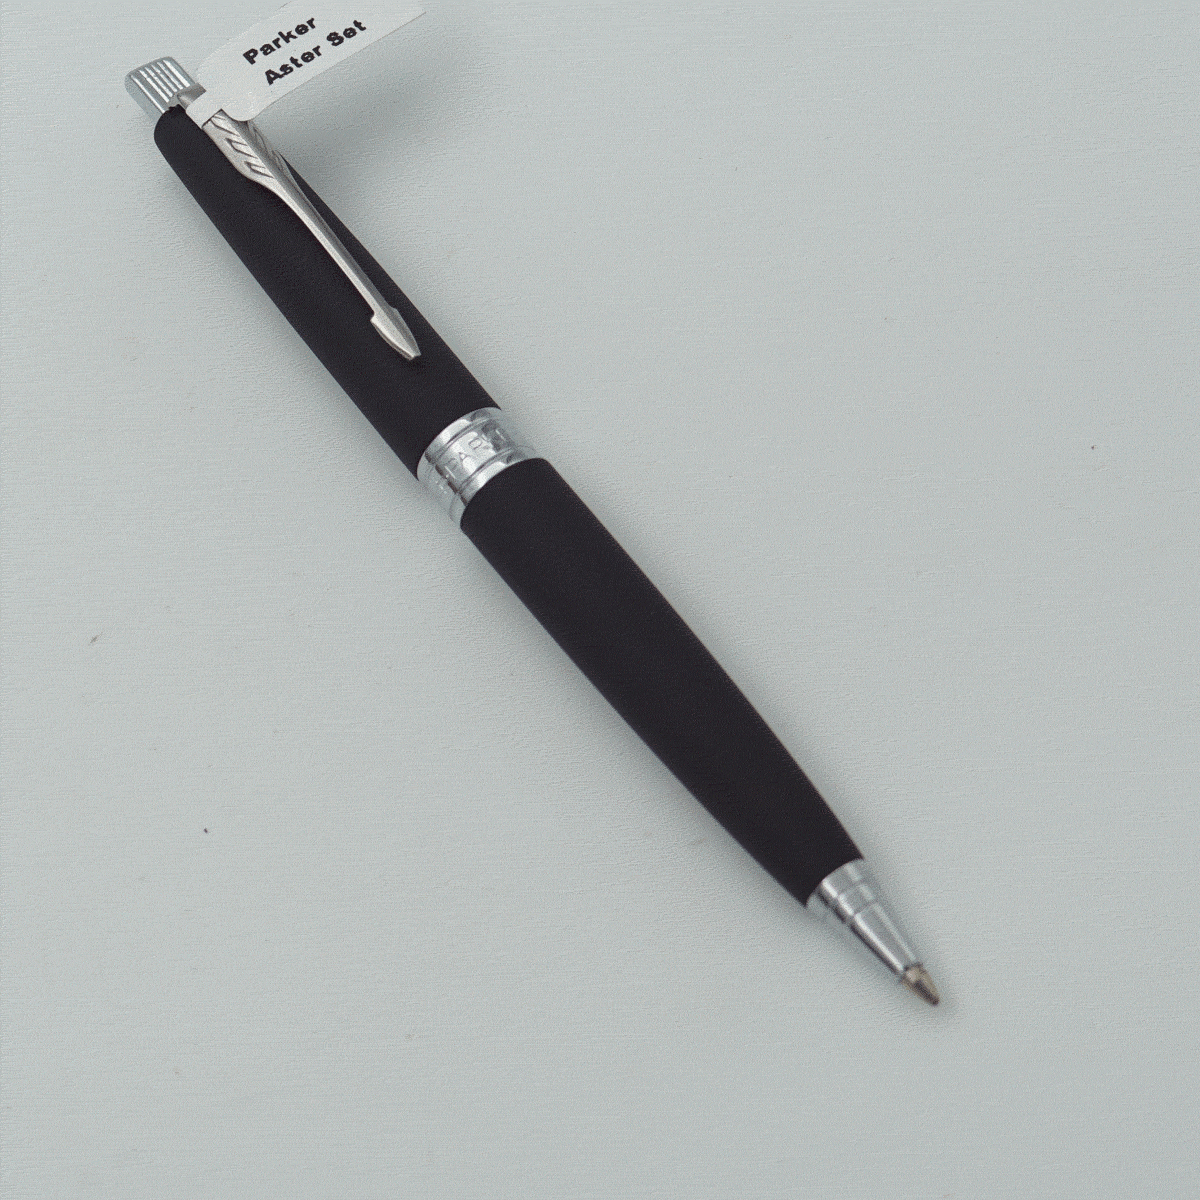 Parker Aster Matte Black Color Body With Silver Clip Medium Tip Retractable Type Ball Pen With Card Holder Pen Set SKU 24188